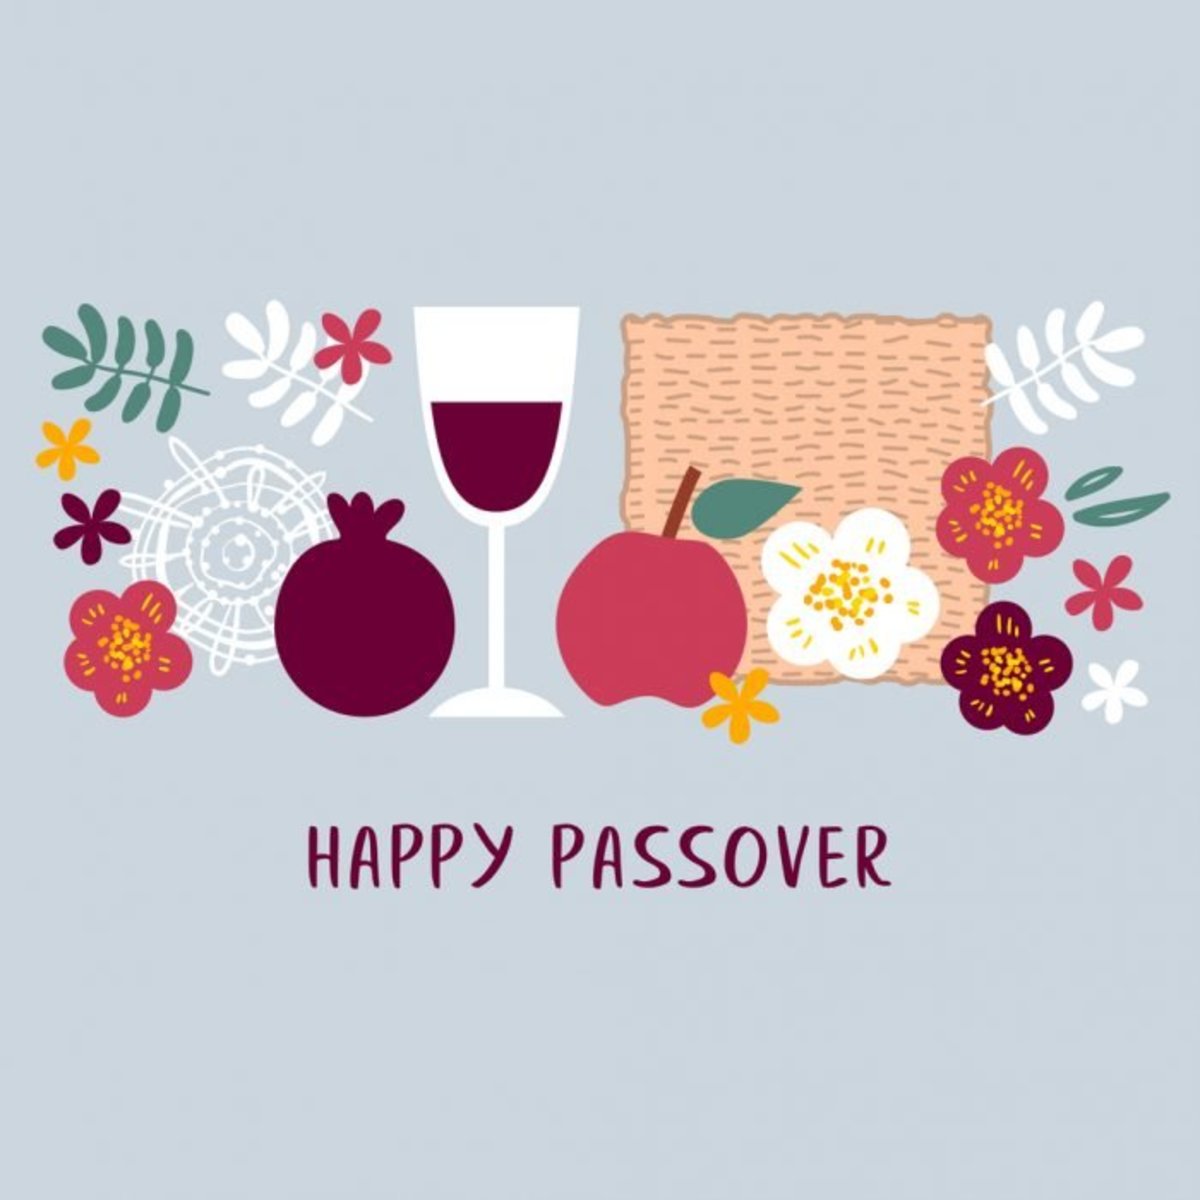 Happy Passover And Easter Greetings